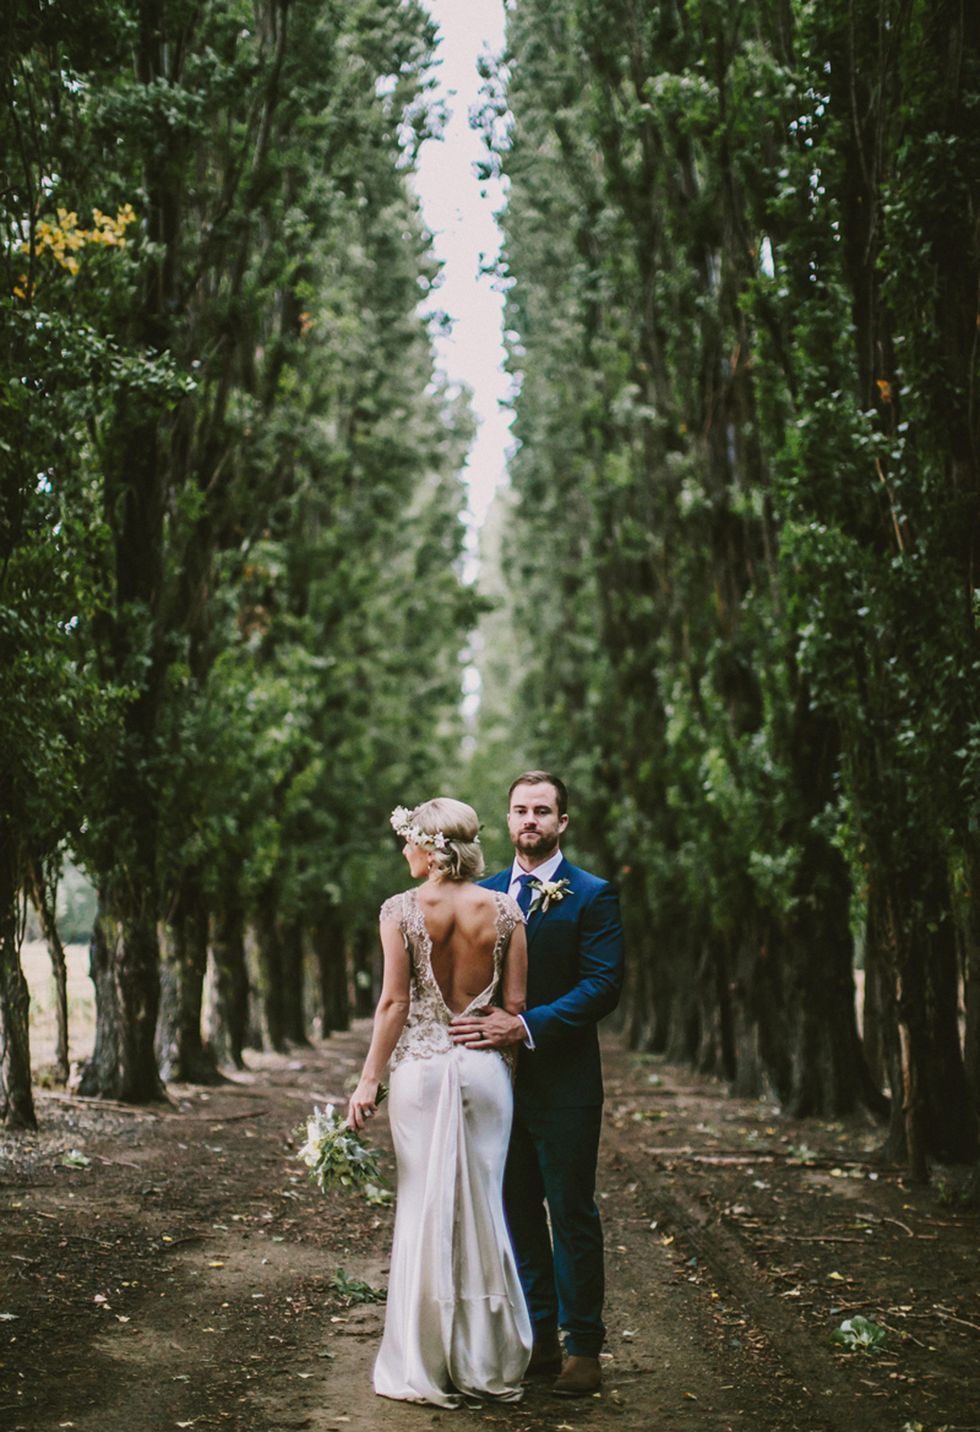 Dress, Trousers, Coat, Photograph, Bridal clothing, Outerwear, People in nature, Forest, Bride, Wedding dress, 